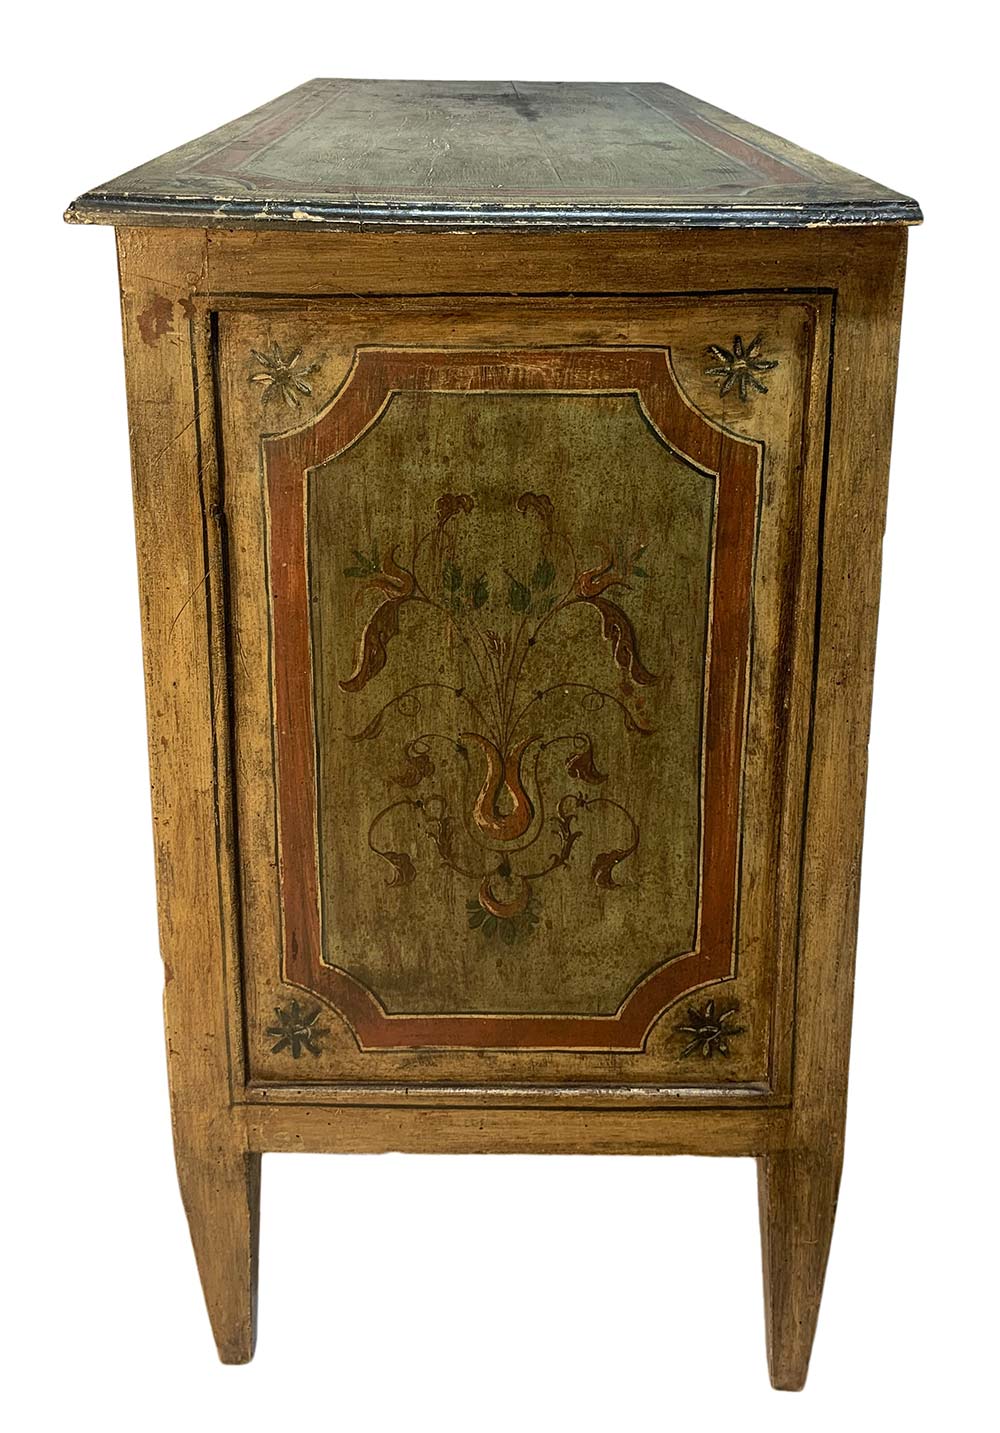 lacquered wooden chest of drawers, early nineteenth century Sicily. In the green and shades of - Image 4 of 8